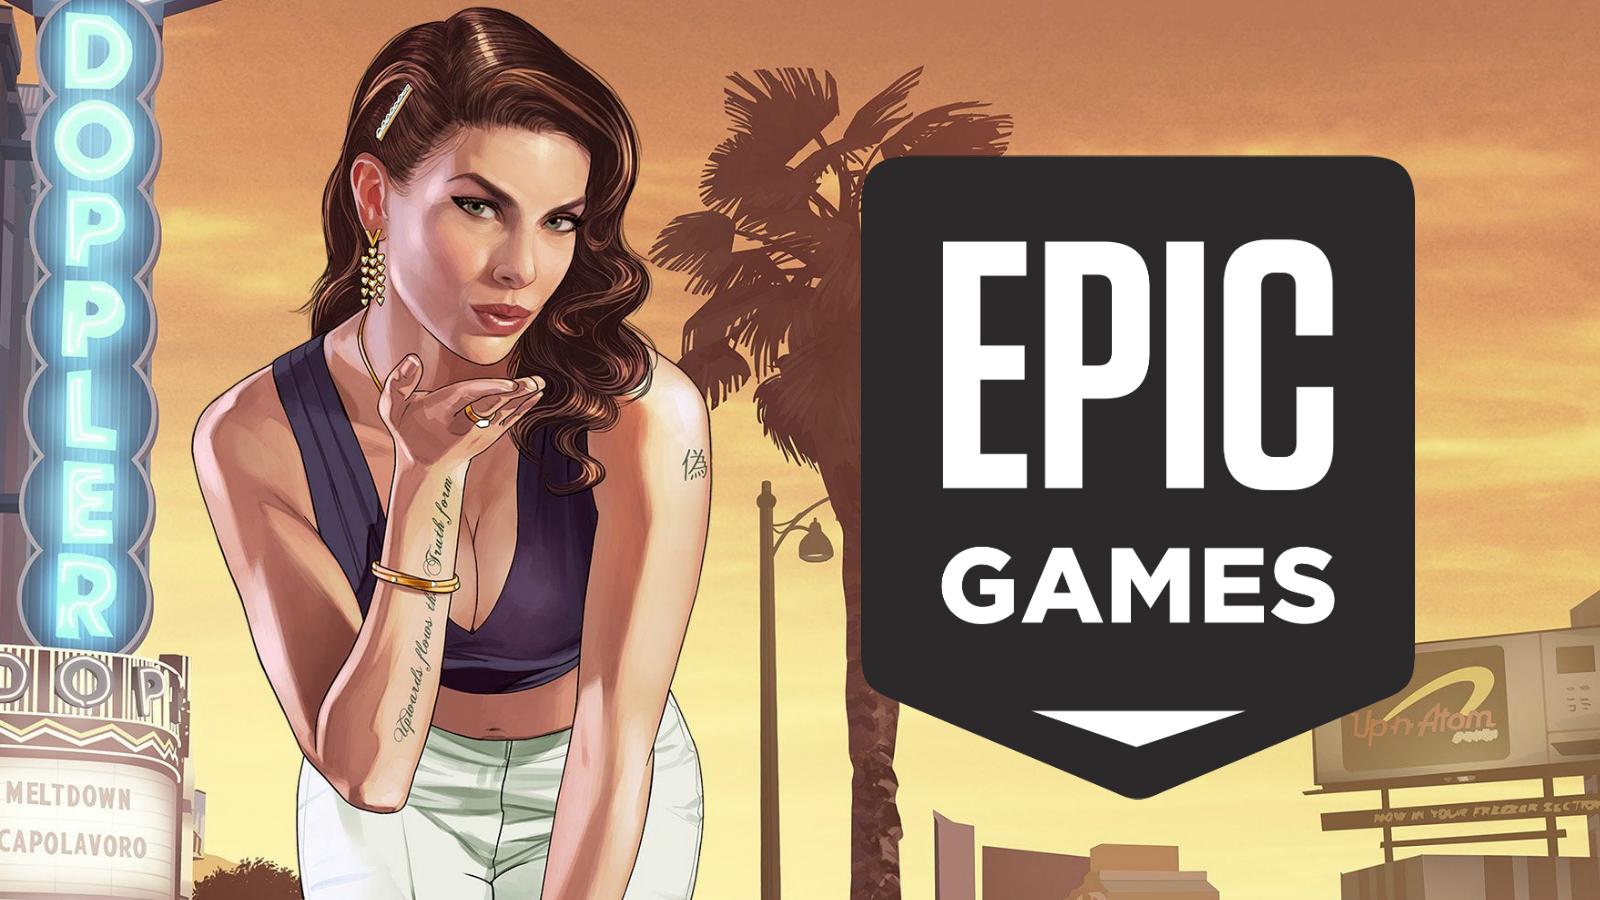 Grand Theft Auto V Premium Edition Free to Grab on Epic Games Store